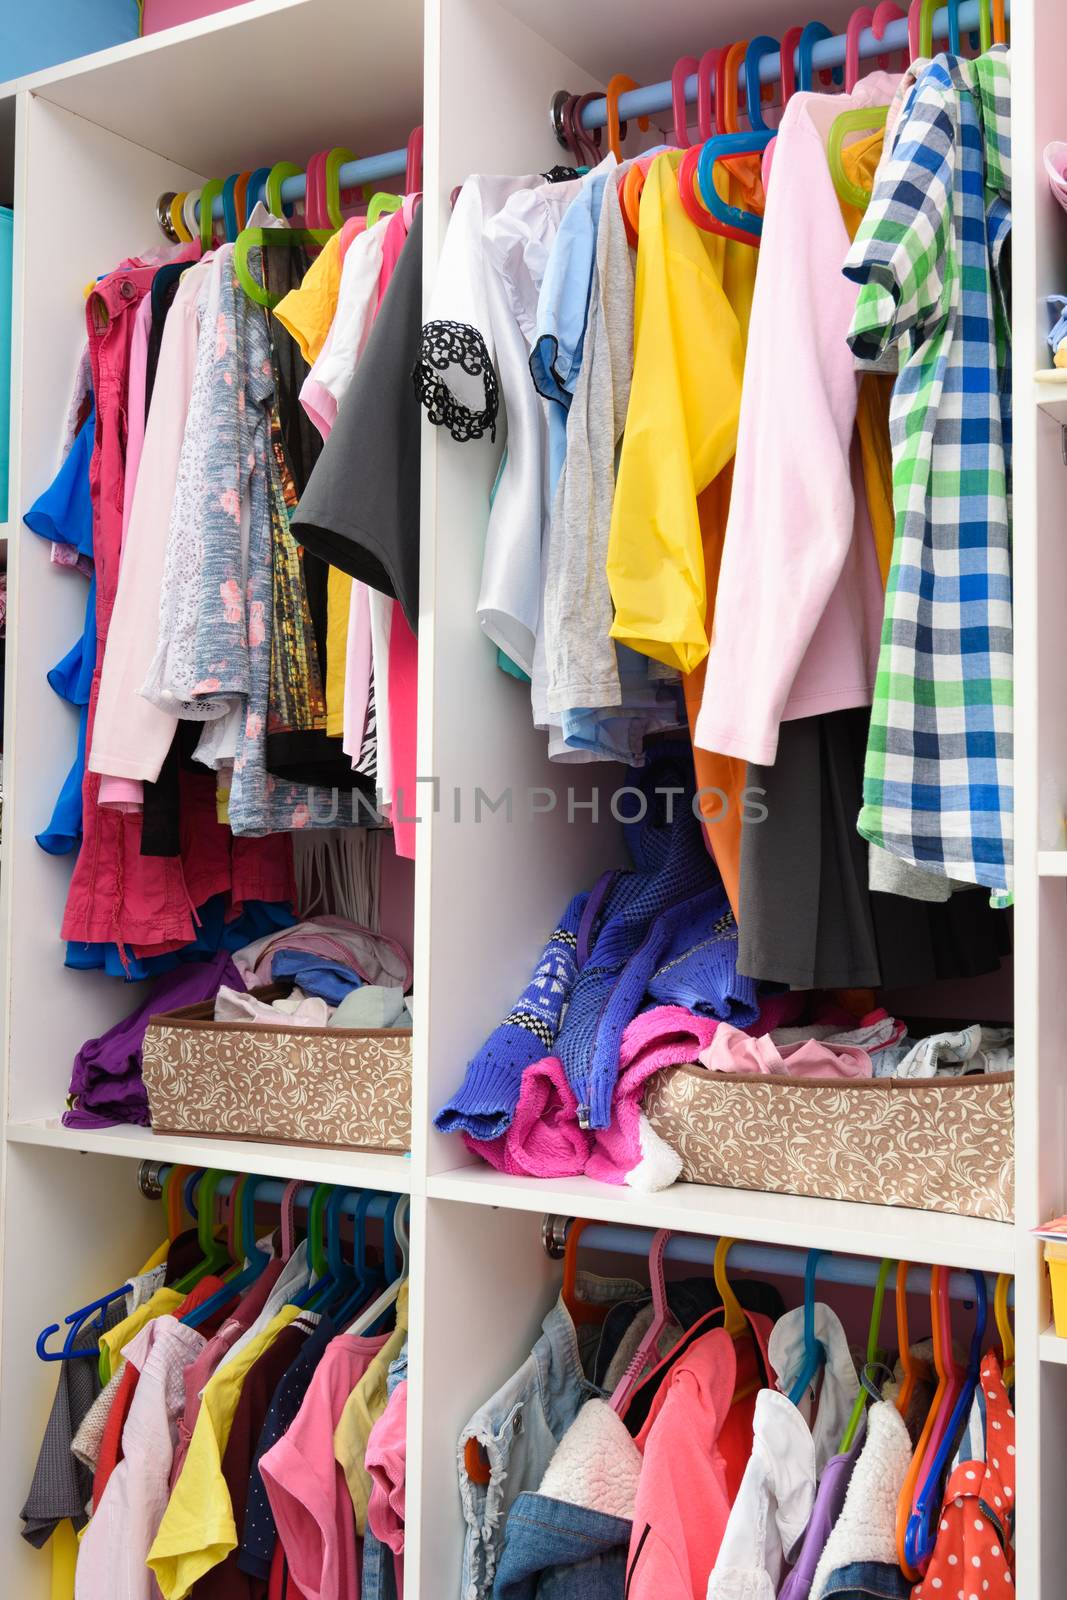 Storage of baby items in a home closet